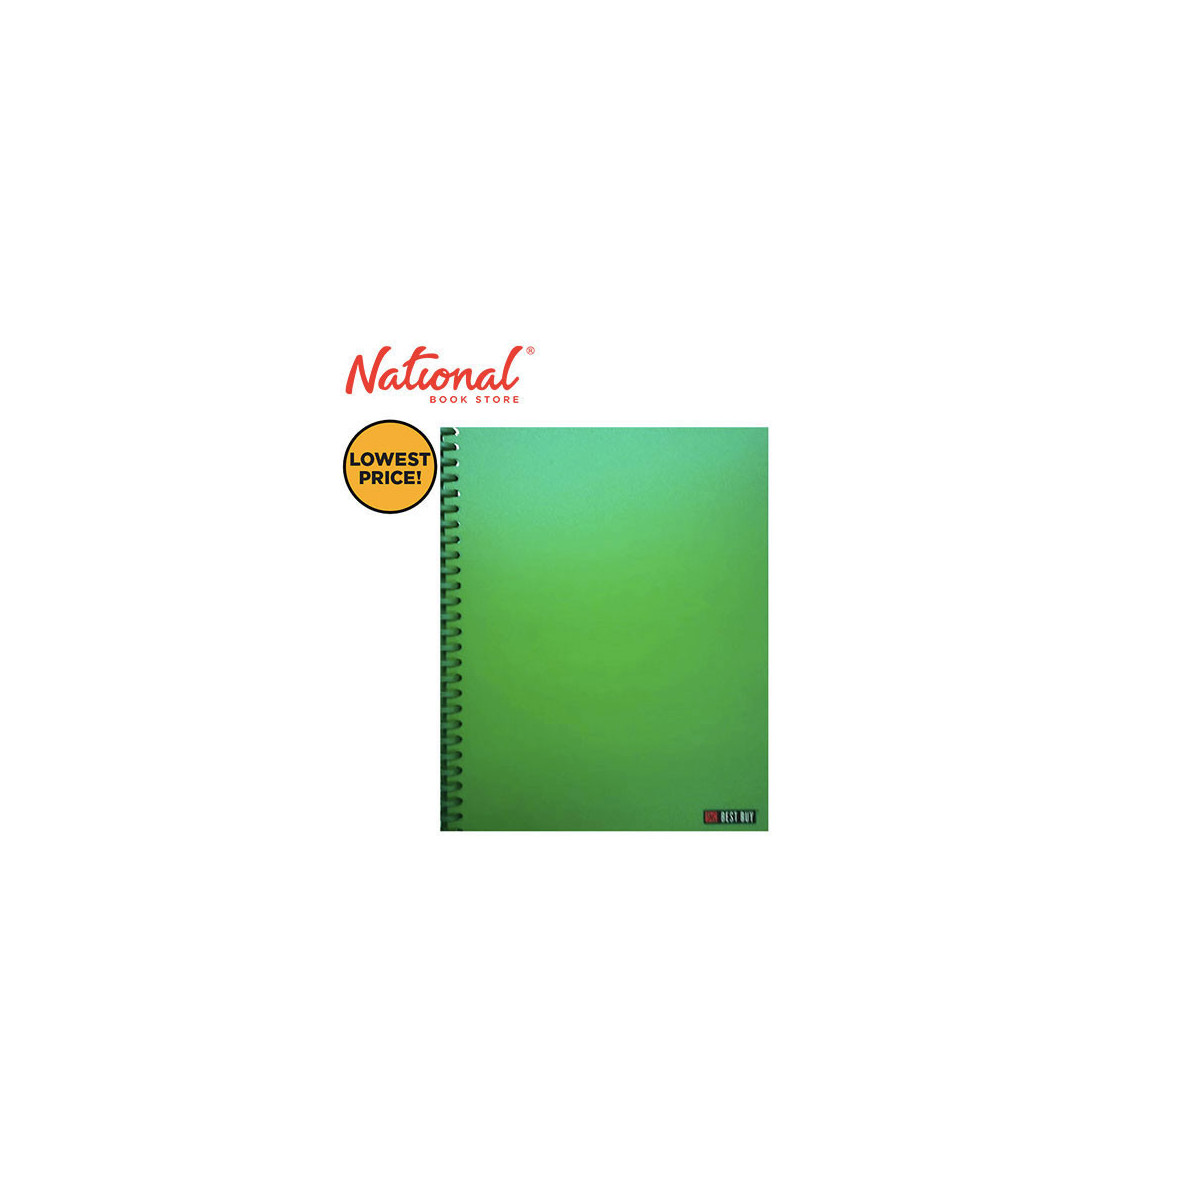 BEST BUY CLEARBOOK REFILLABLE LONG GREEN 20 SHEETS 27 HOLES GREEN